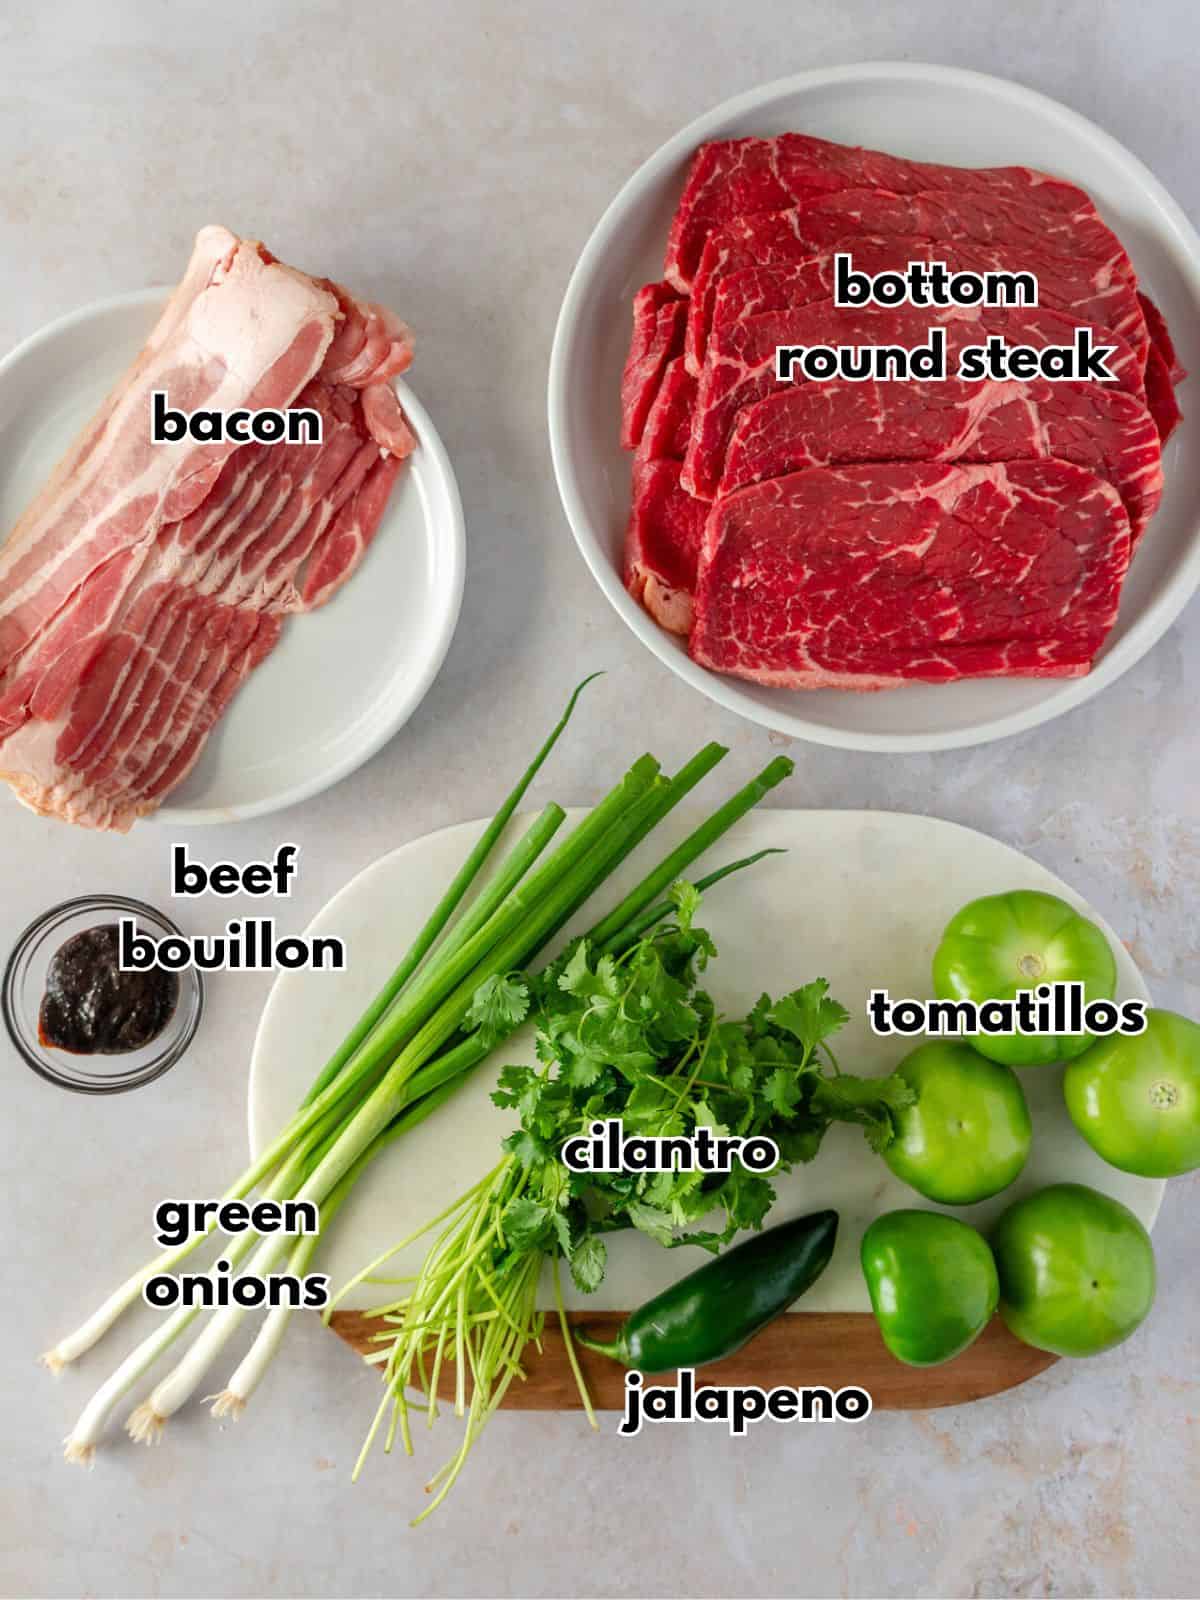 Ingredients with text, bacon, bottom round steak, beef bouillon, green onions, cilantro, jalapeno, and tamtillos.